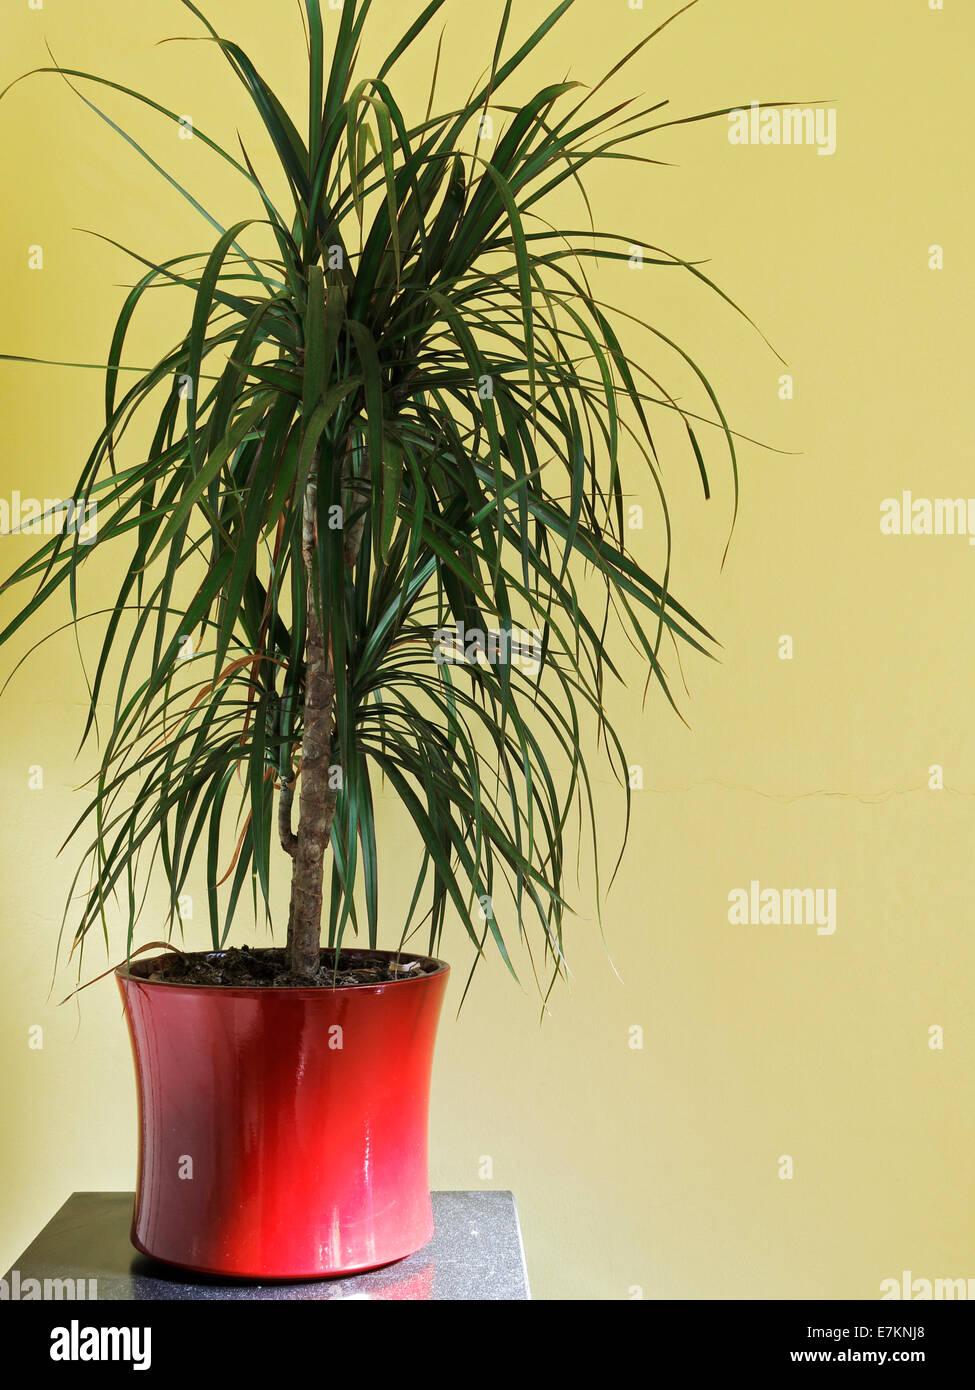 A Madagascar dragon tree in a red pot. Stock Photo